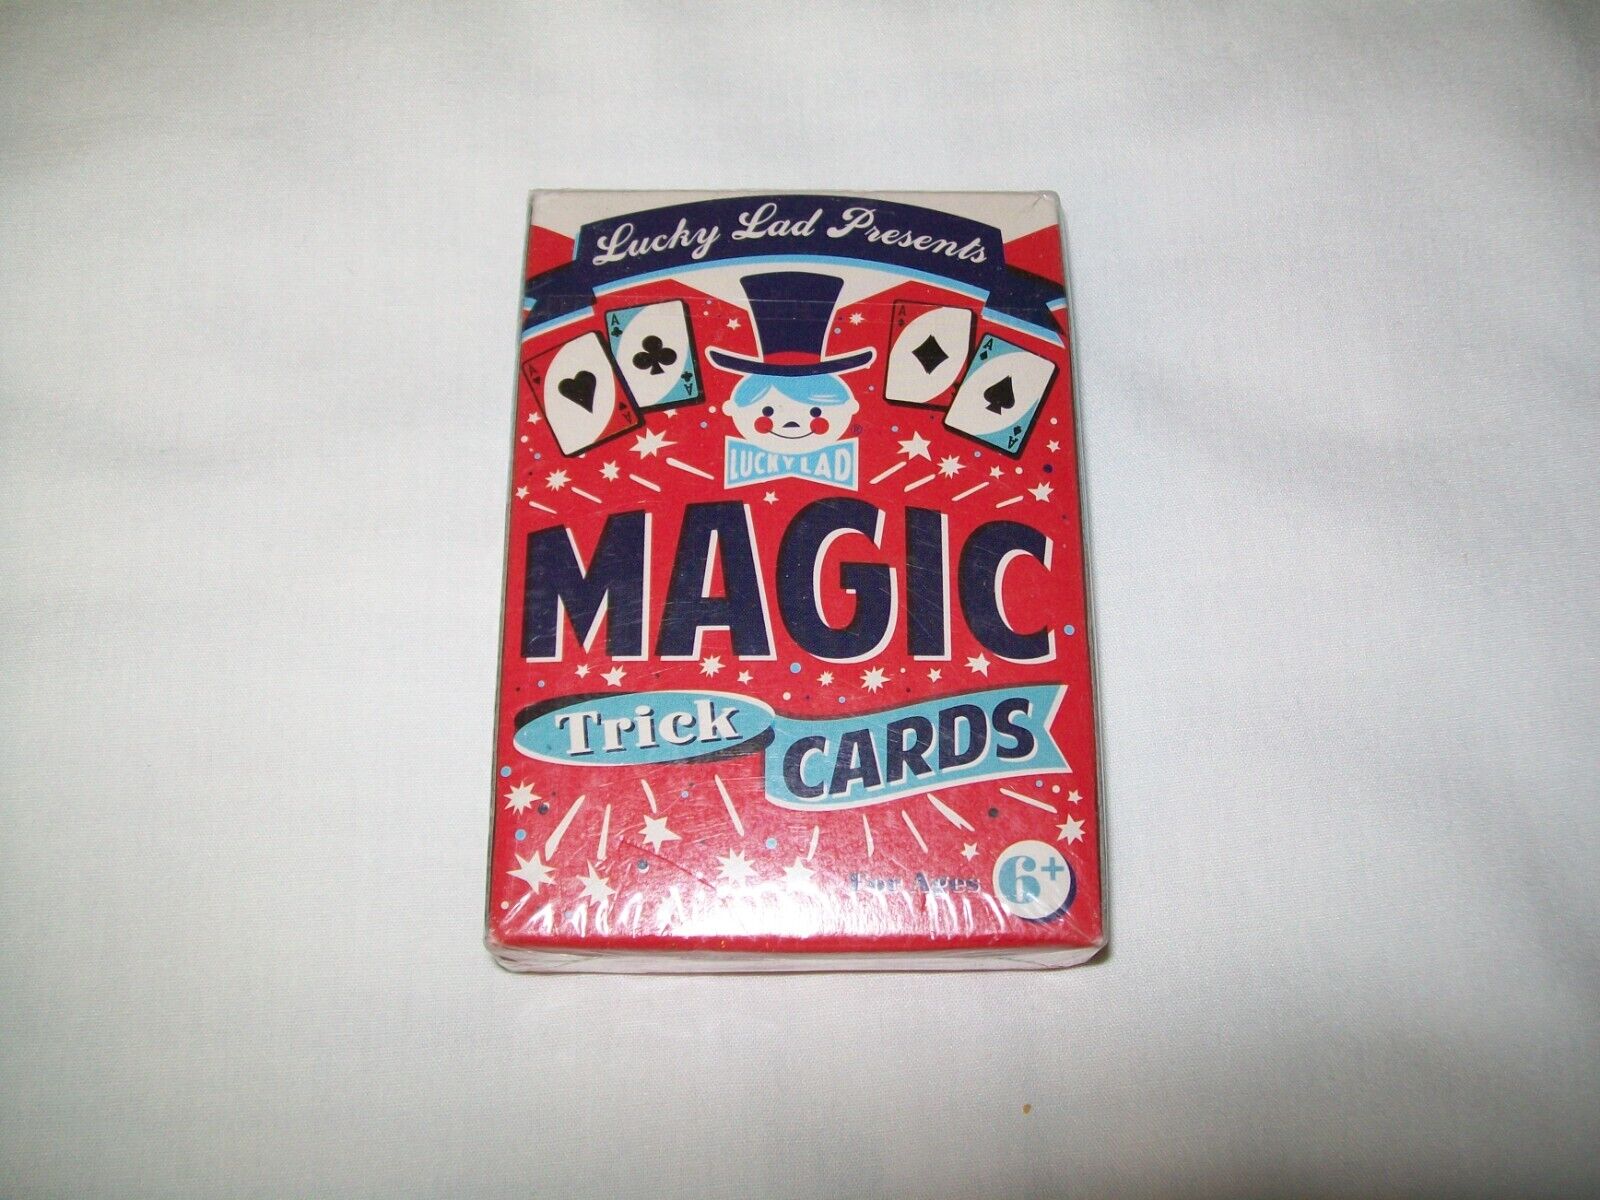 2015 Bell & Curfew LTD. Lucky Lad Magic Trick Cards Deck New in Package